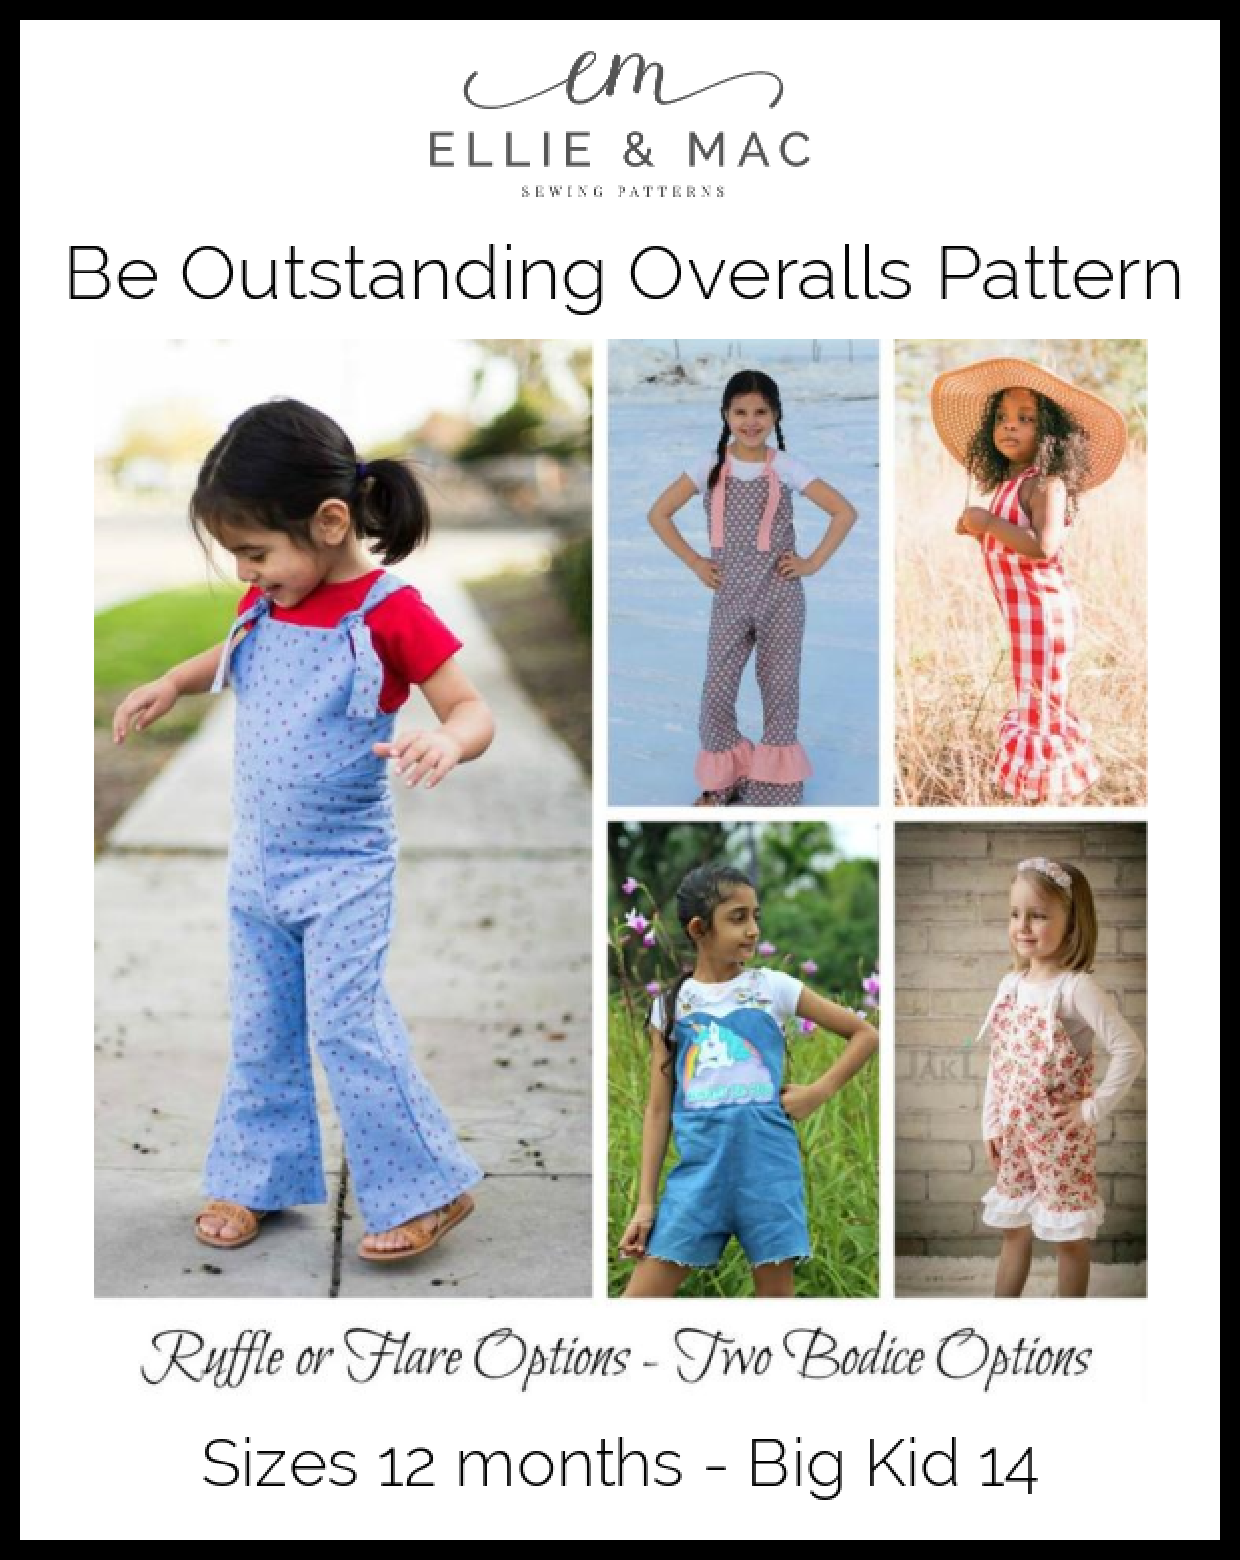 Be Outstanding Overalls Pattern